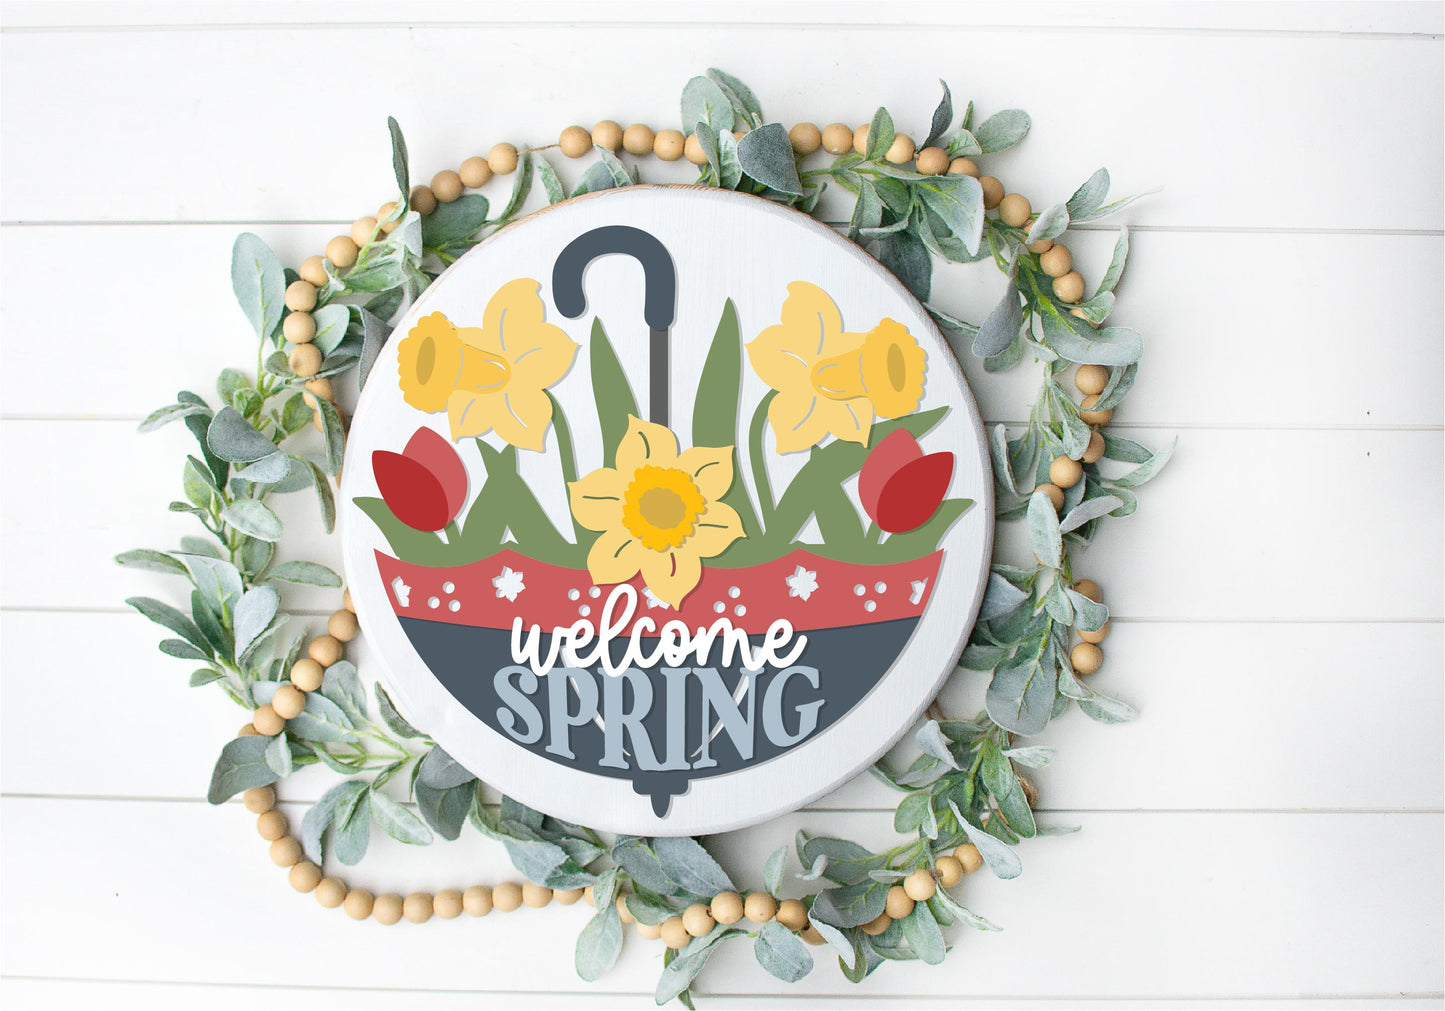 Welcome Spring flower sign